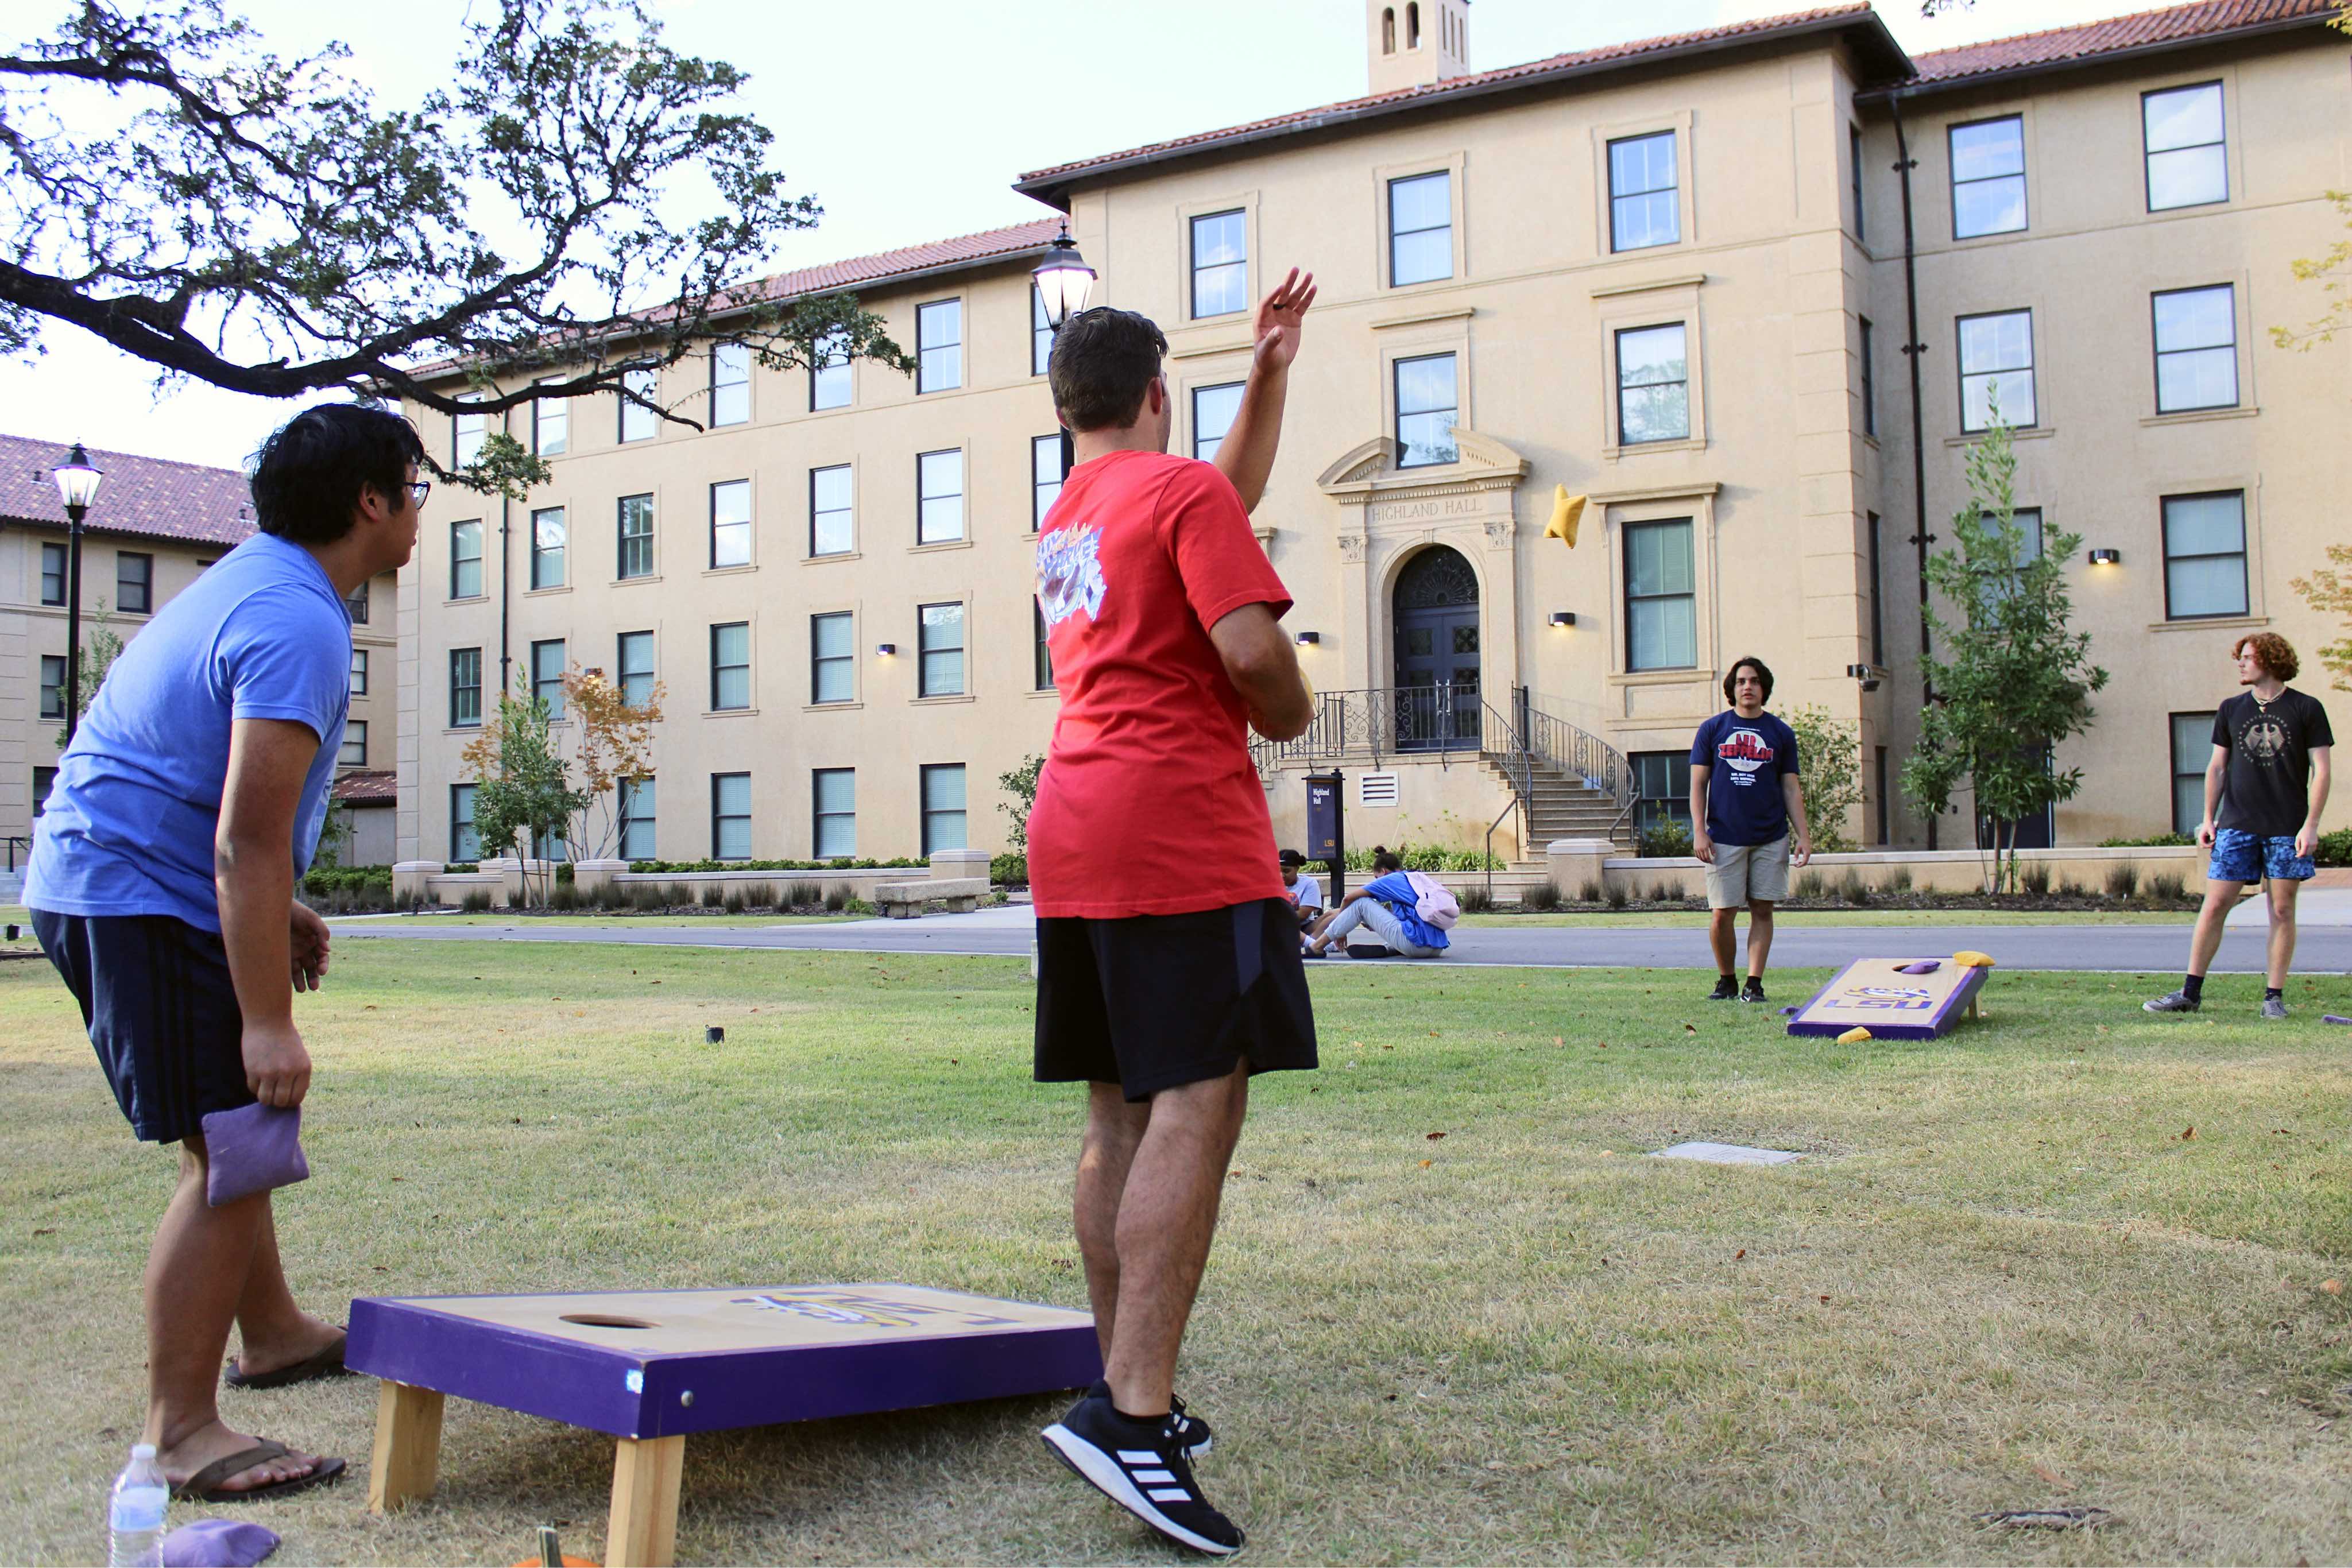 Residents playing cornhole in the courtyard of the Horseshoe Community.